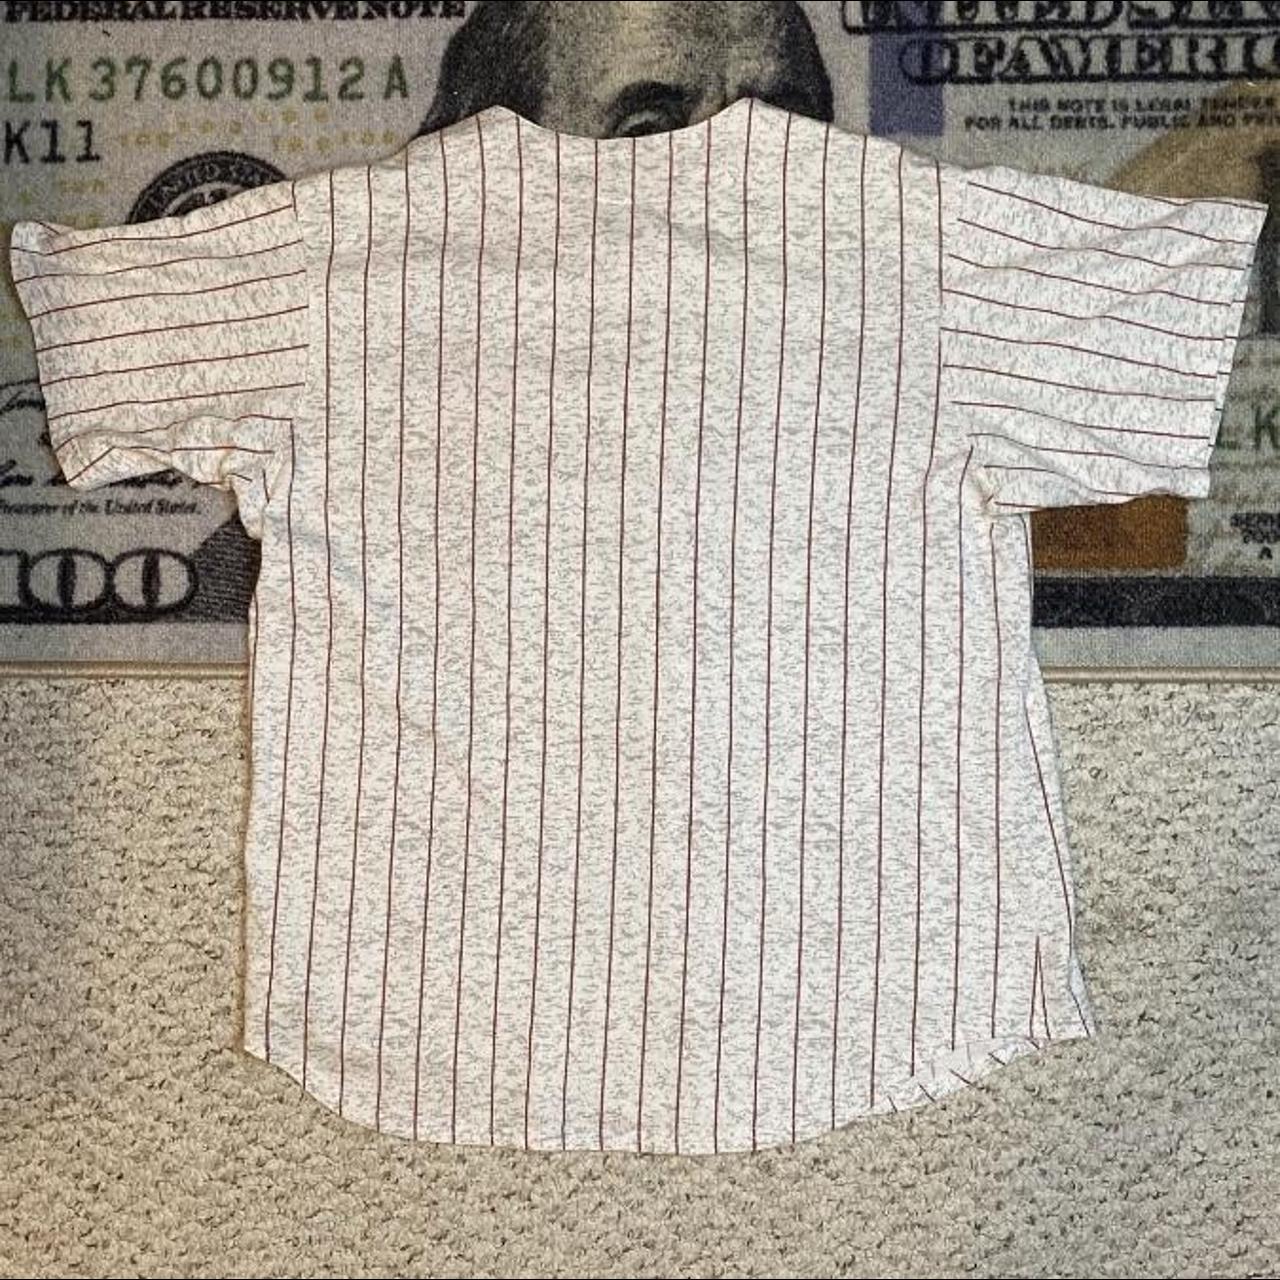 Vintage MLB (Off The Bench) - New York Yankees Pinstripe Jersey